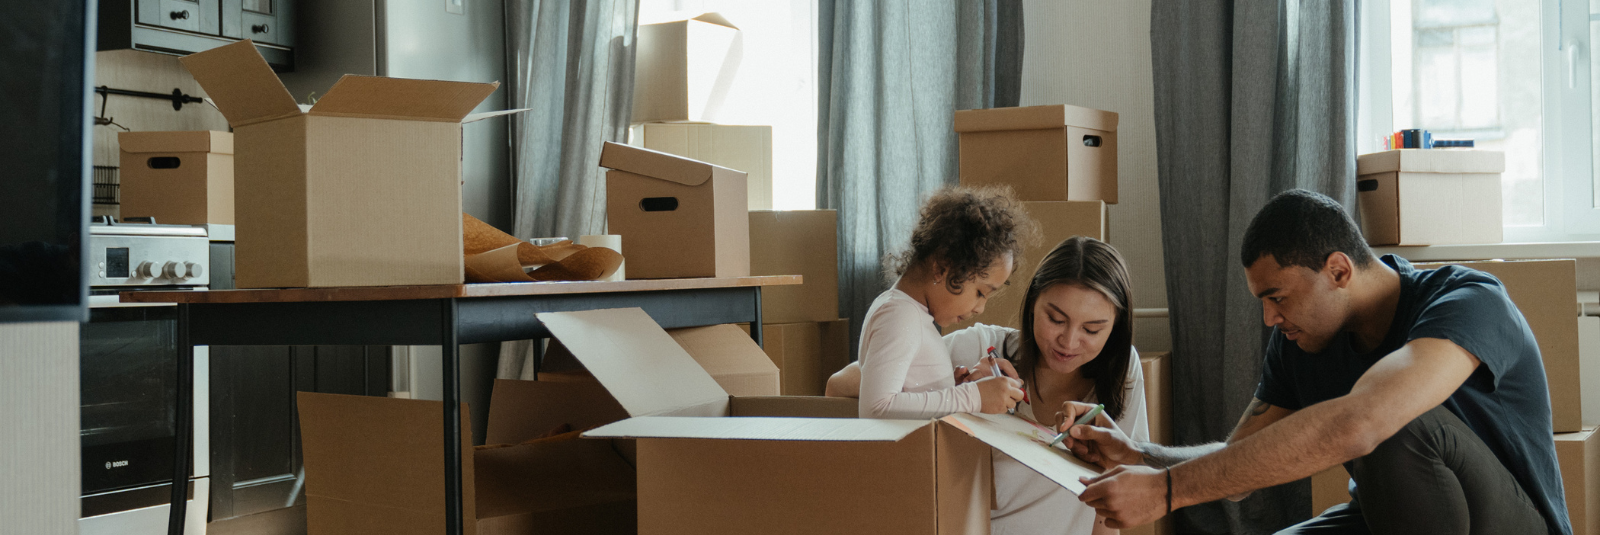 a family unpacking boxes in their new home